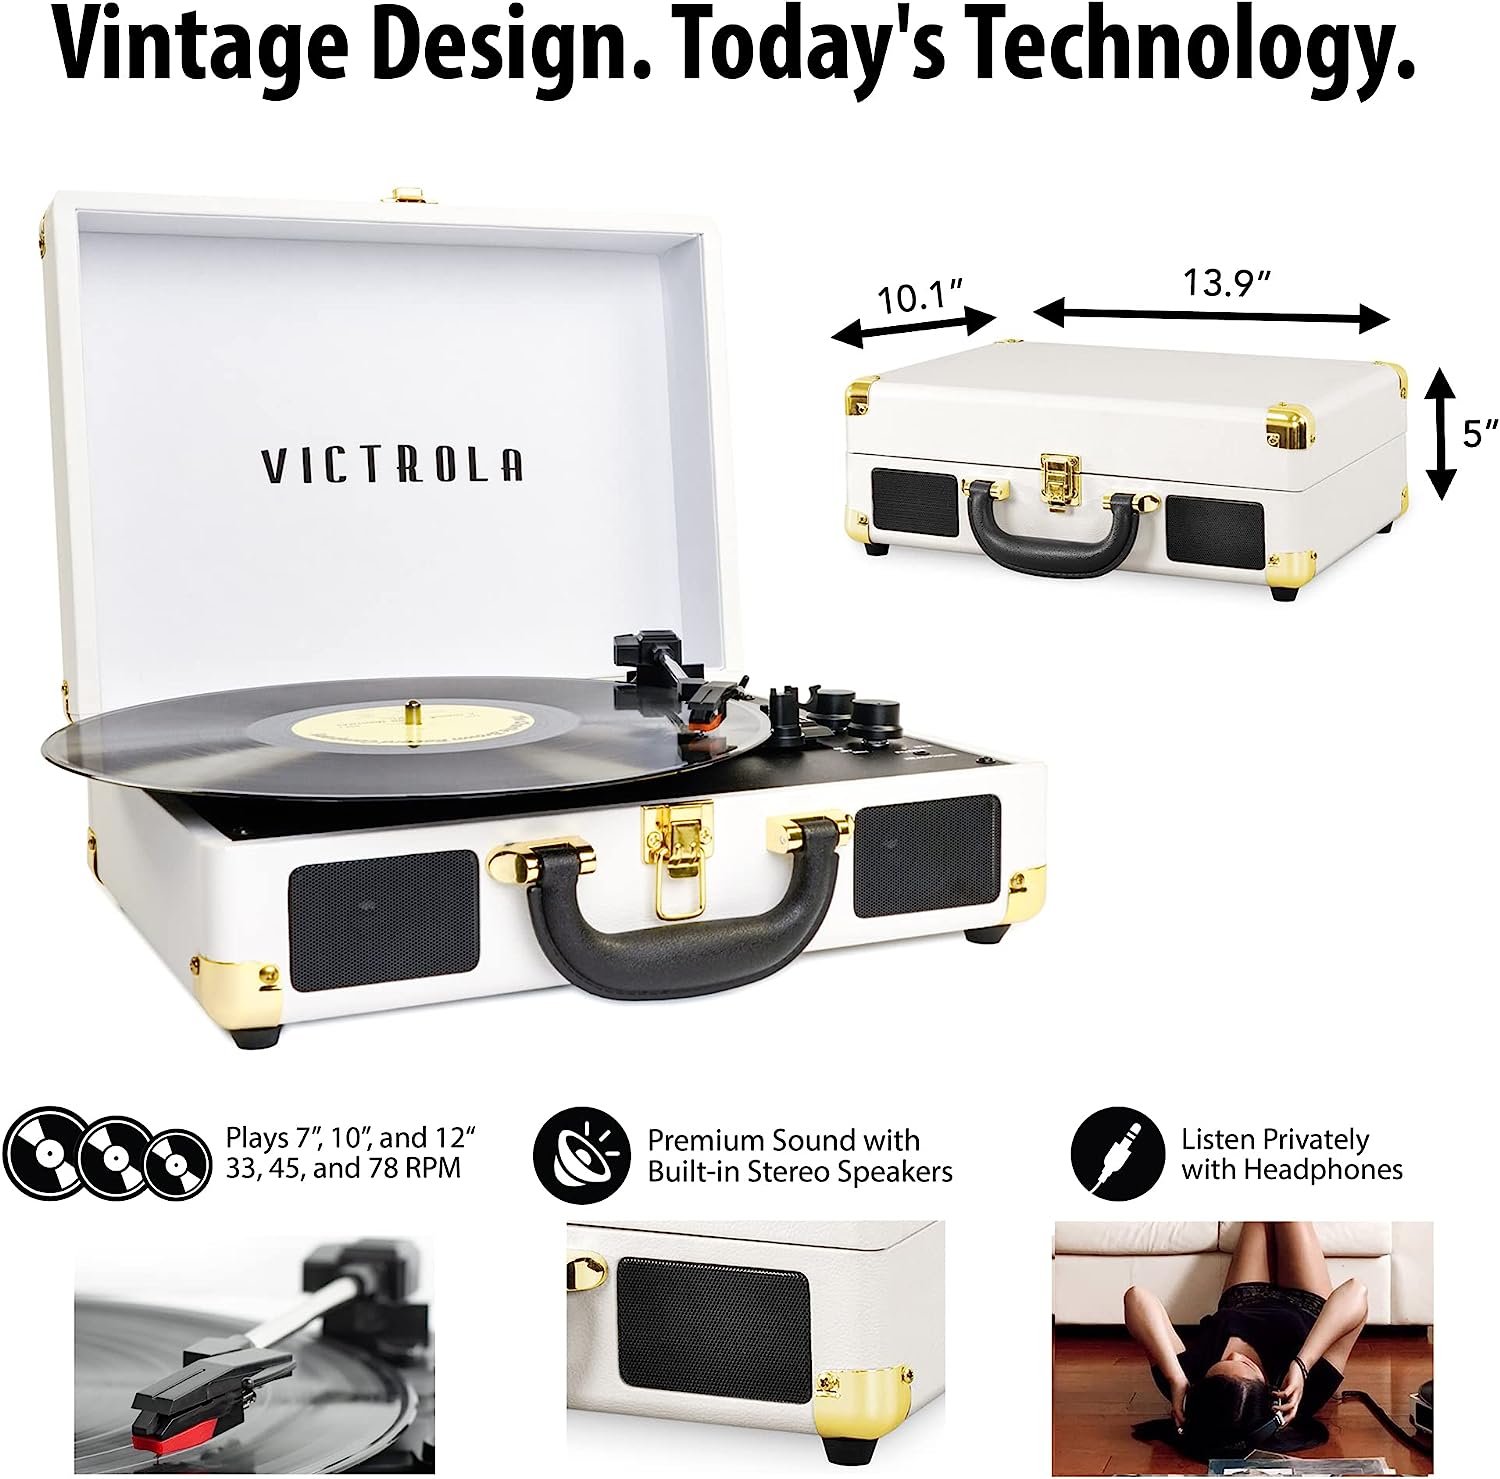 Victrola Vintage 3-Speed Bluetooth Portable Suitcase Record Player with Built-in Speakers | Upgraded Turntable Audio Sound| Includes Extra Stylus | Red, 1SFA (VSC-550BT-RD)